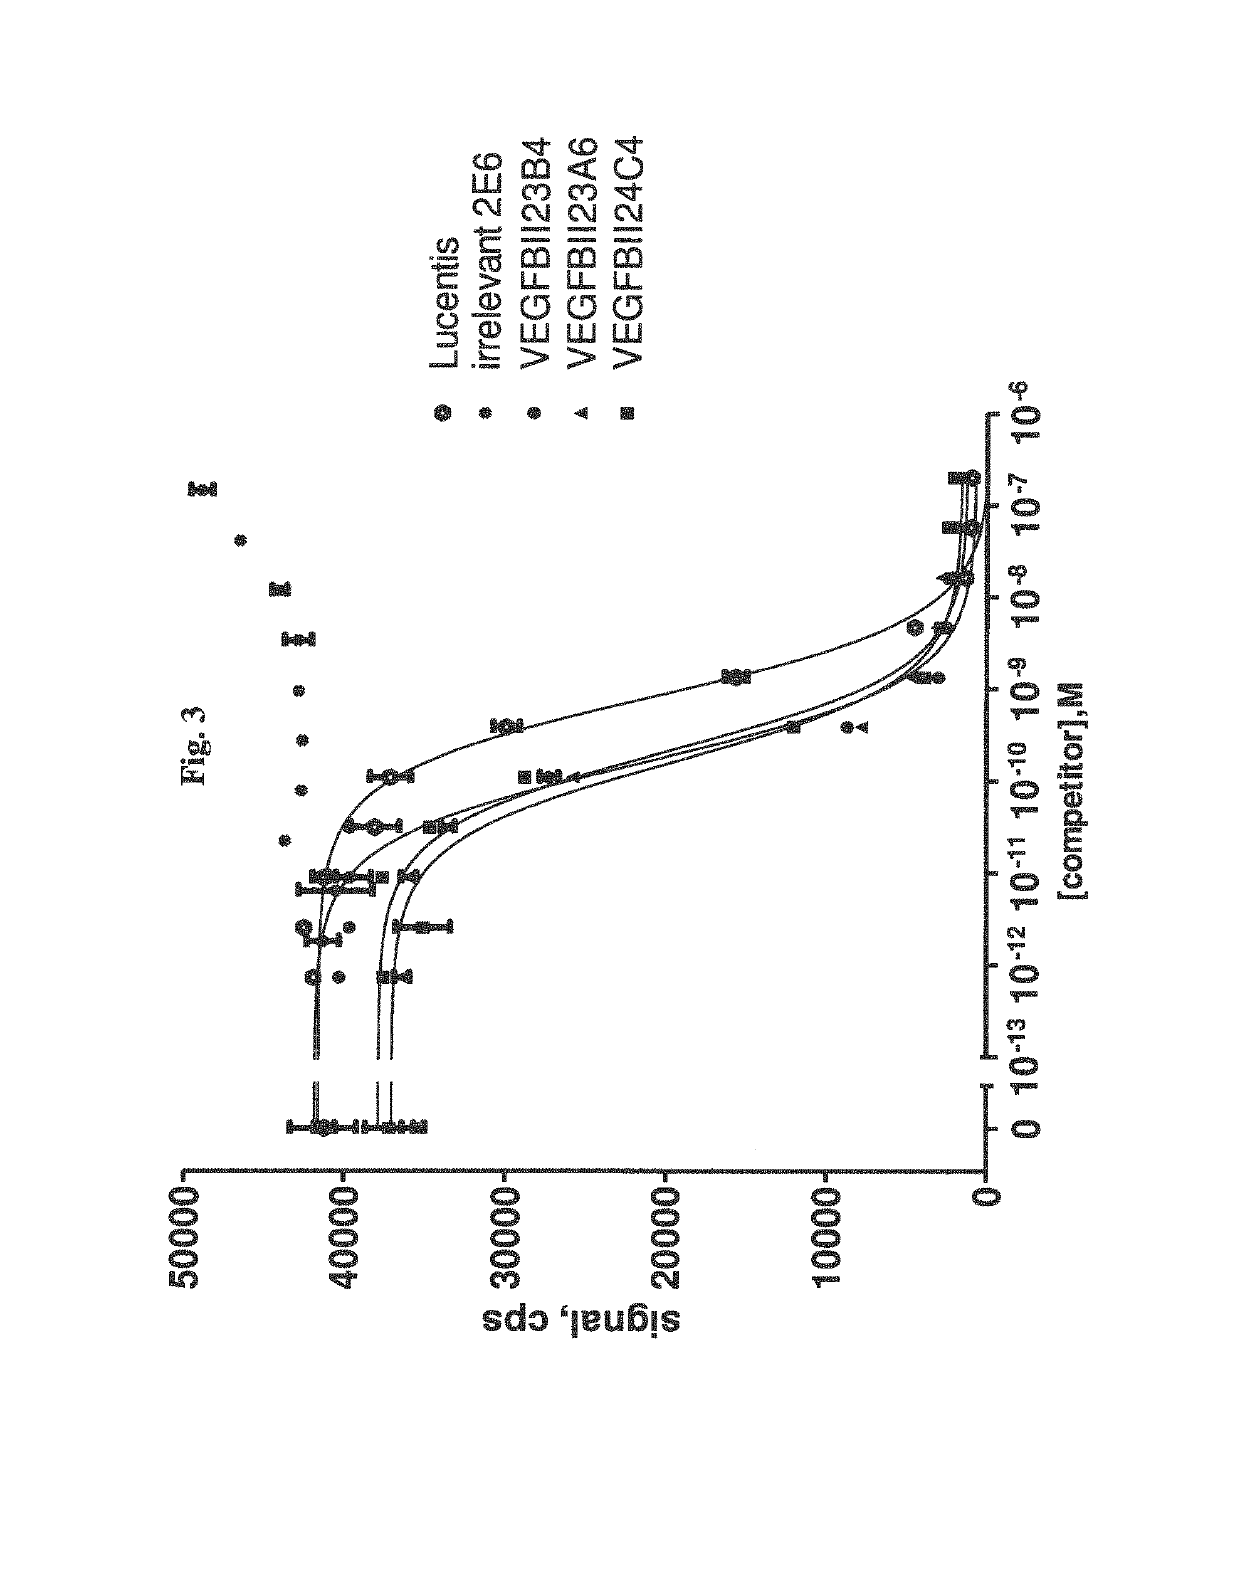 Bispecific binding molecules binding to VEGF and Ang2